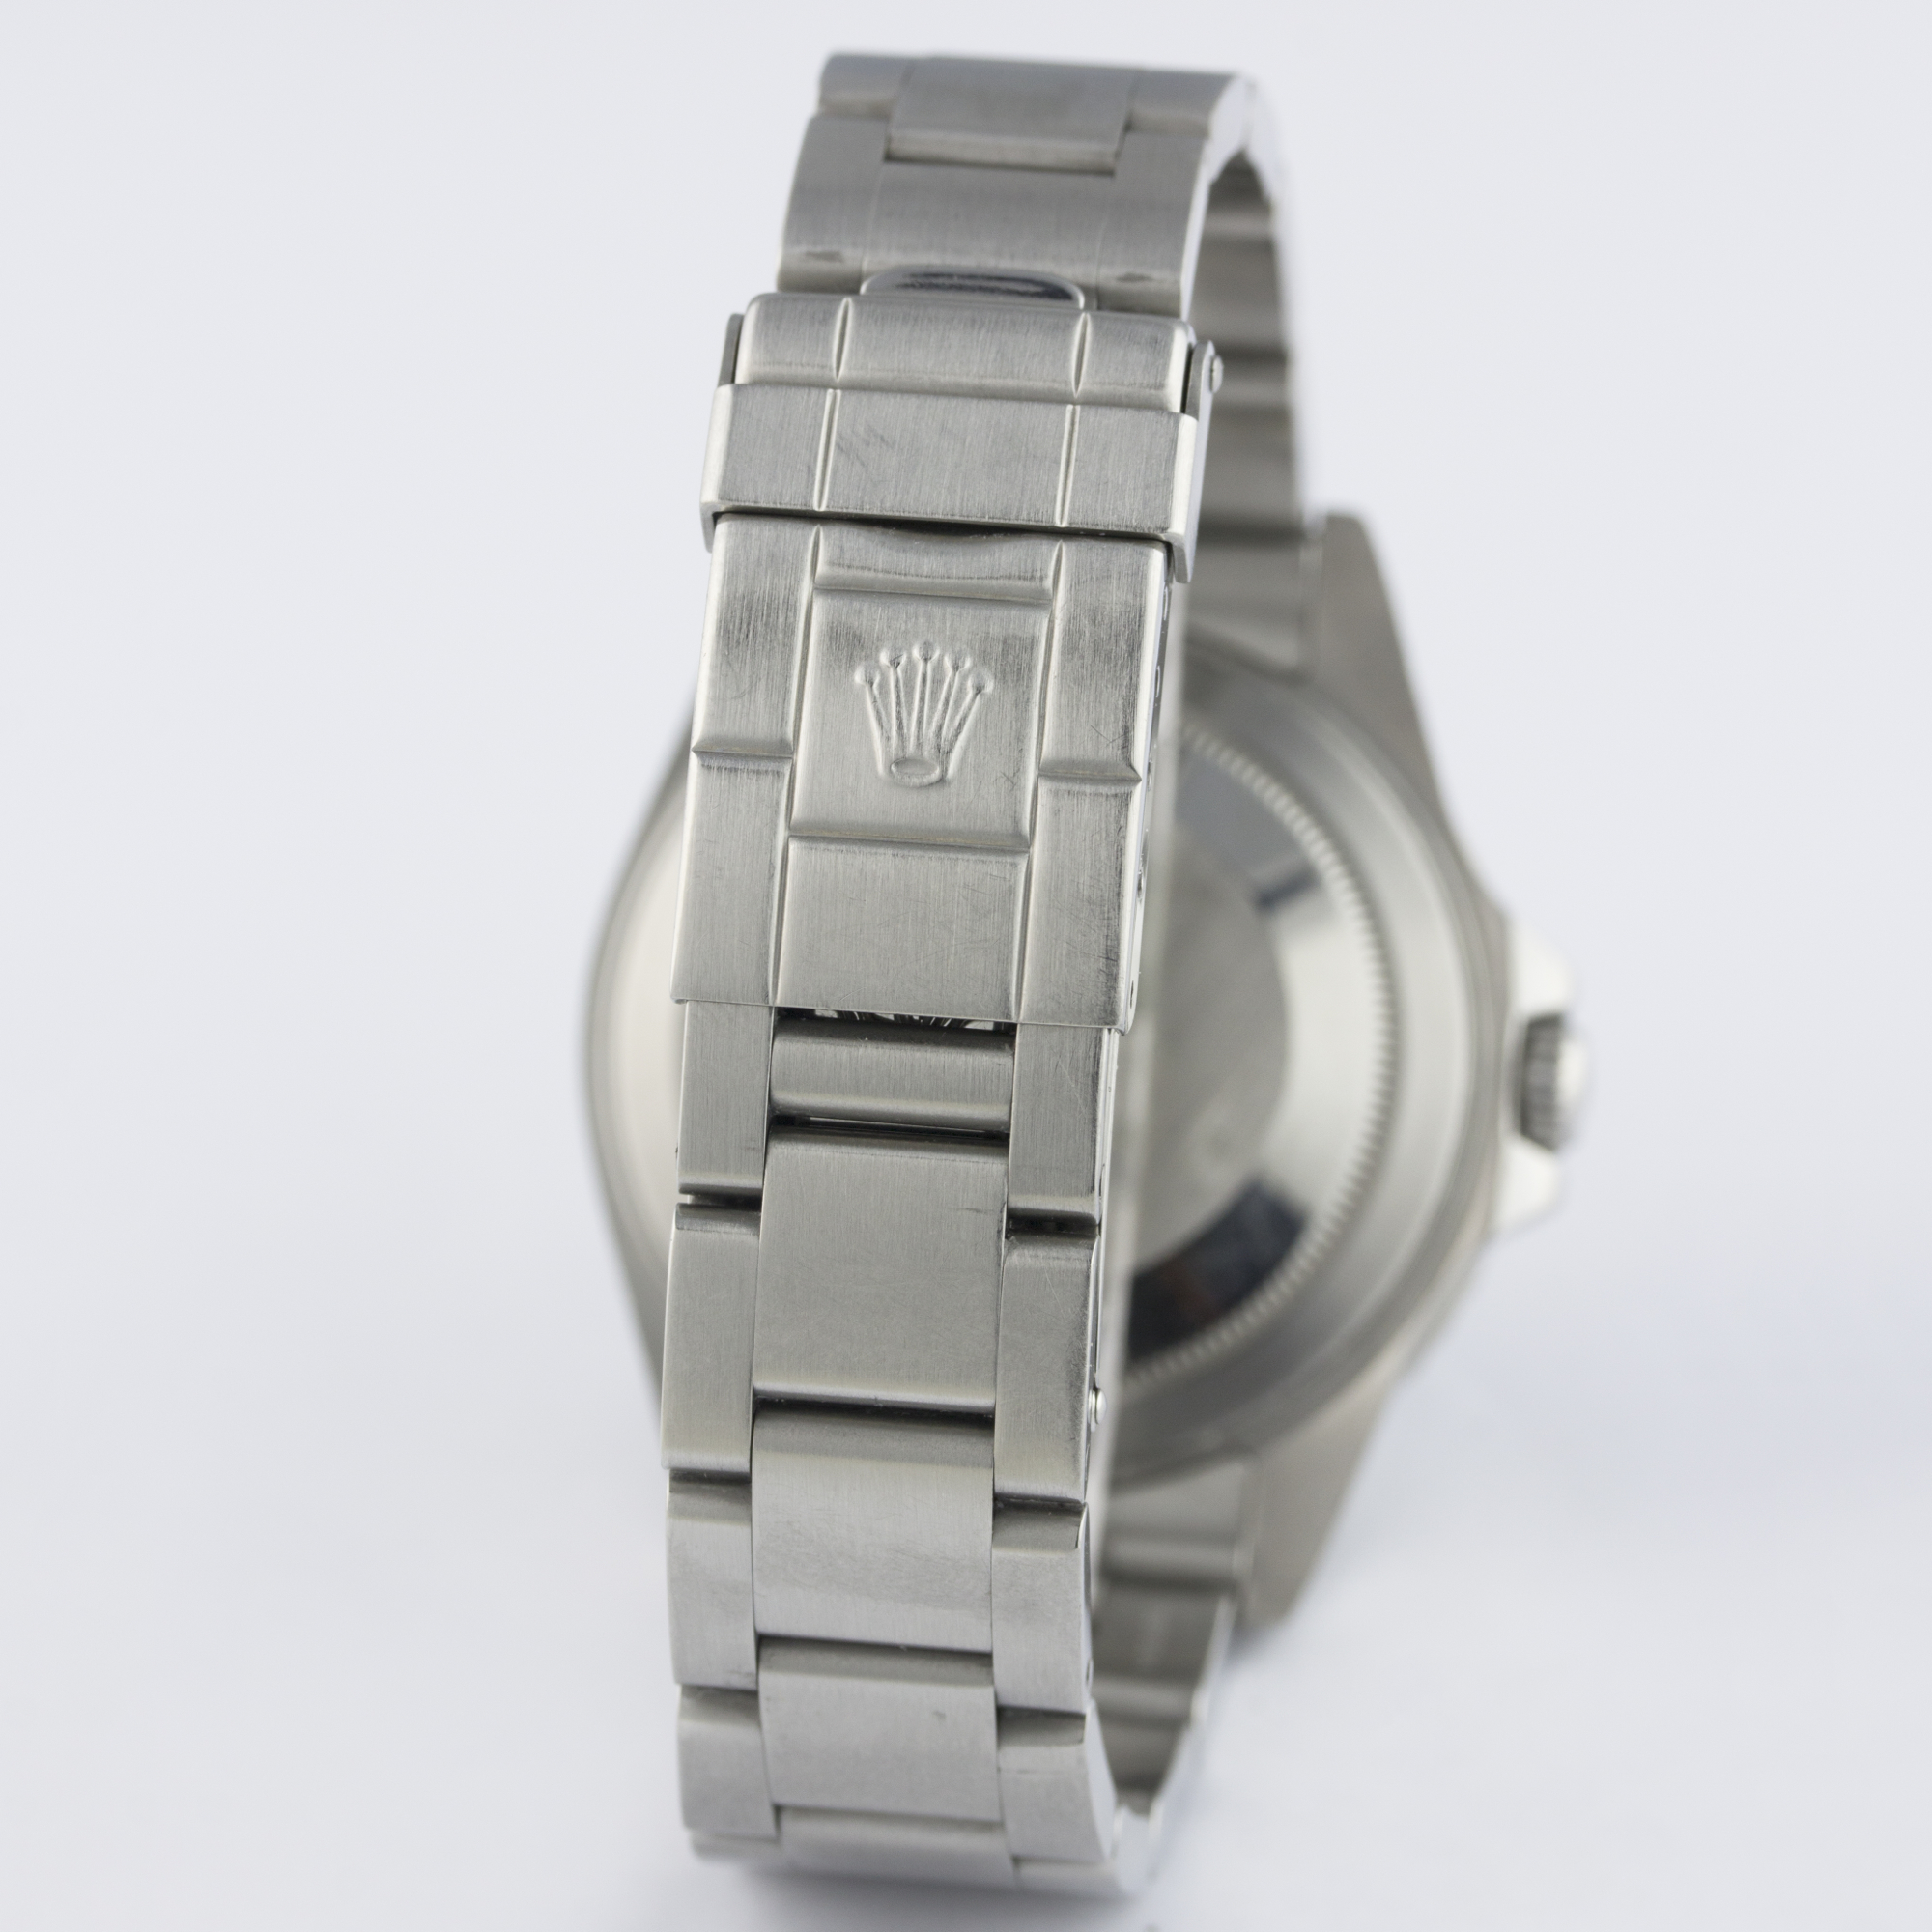 A GENTLEMAN'S STAINLESS STEEL ROLEX OYSTER PERPETUAL DATE GMT MASTER II BRACELET WATCH DATED 2000, - Image 6 of 7